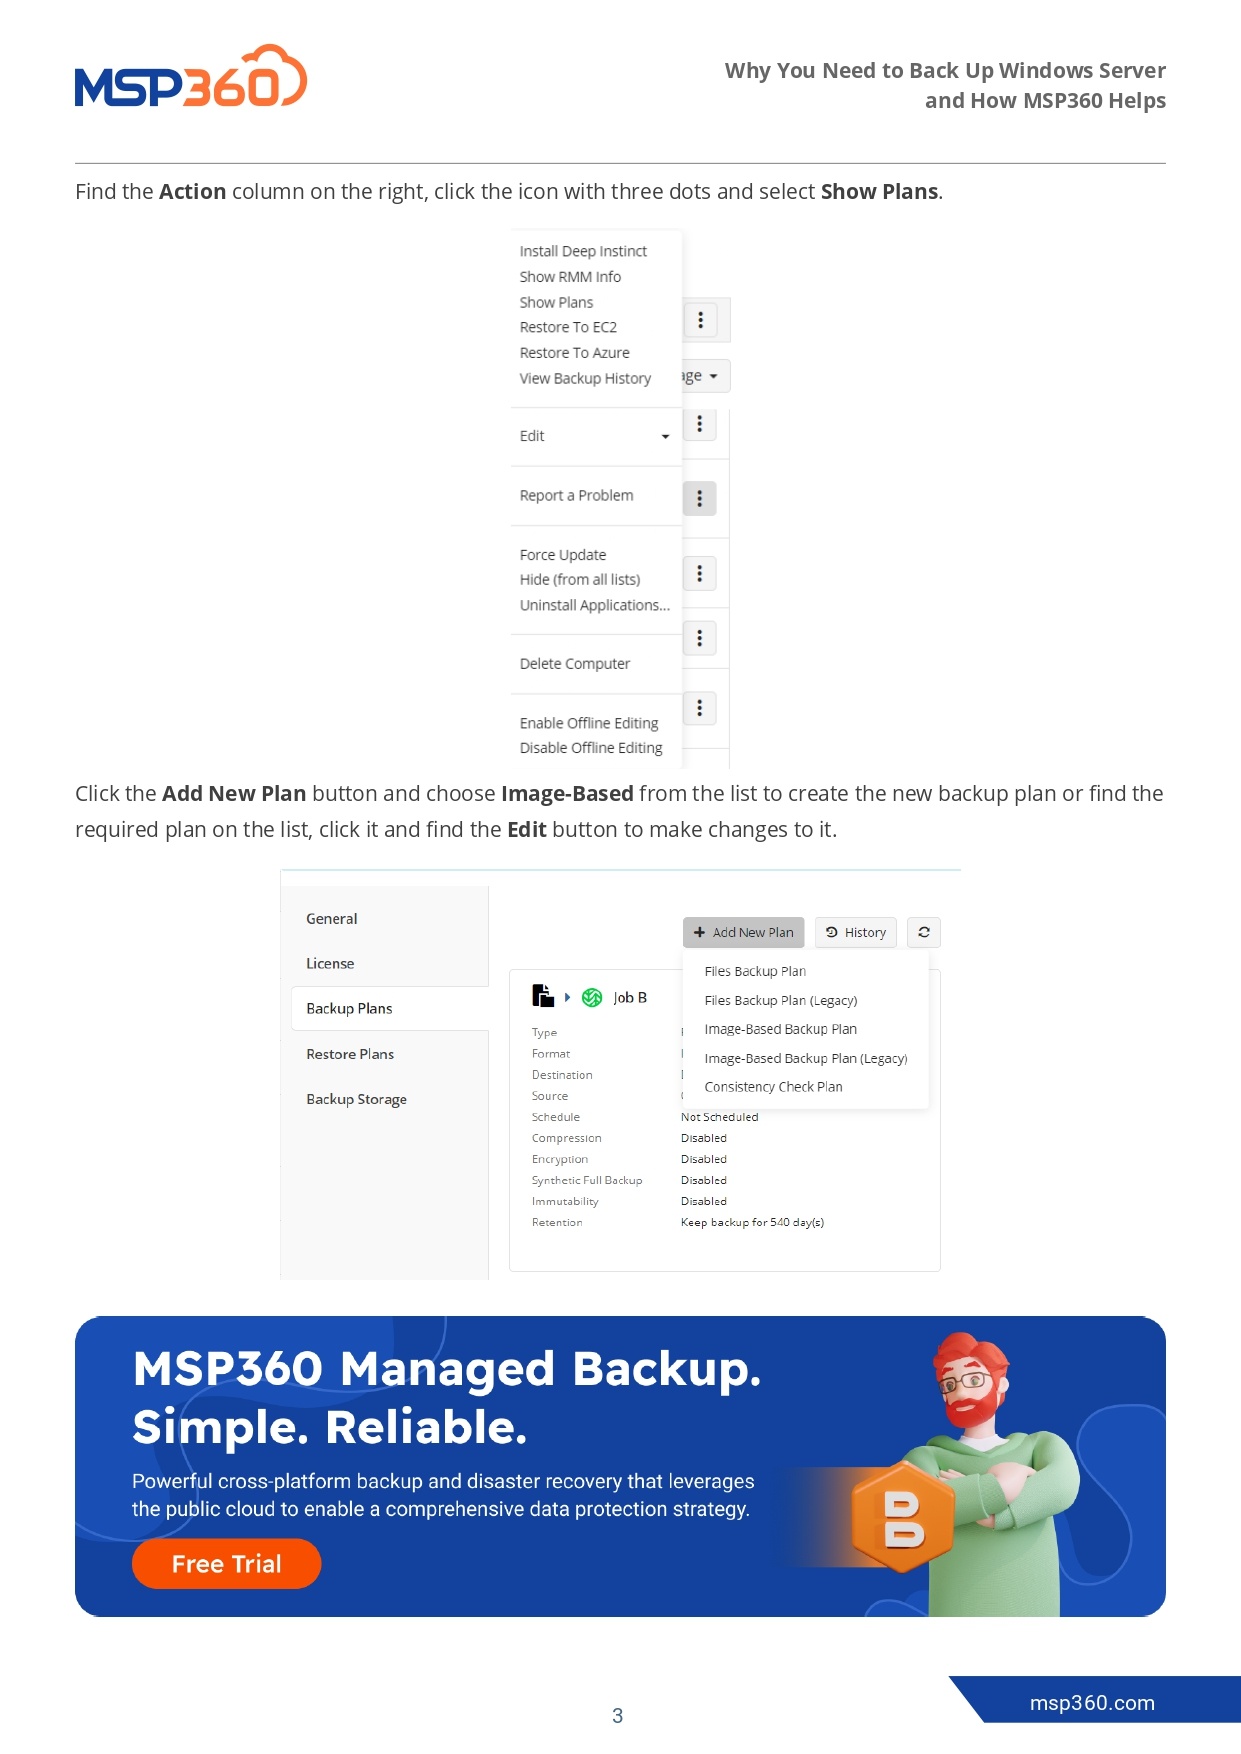 Why You Need to Back Up Windows Server and How MSP360 Helps - 3